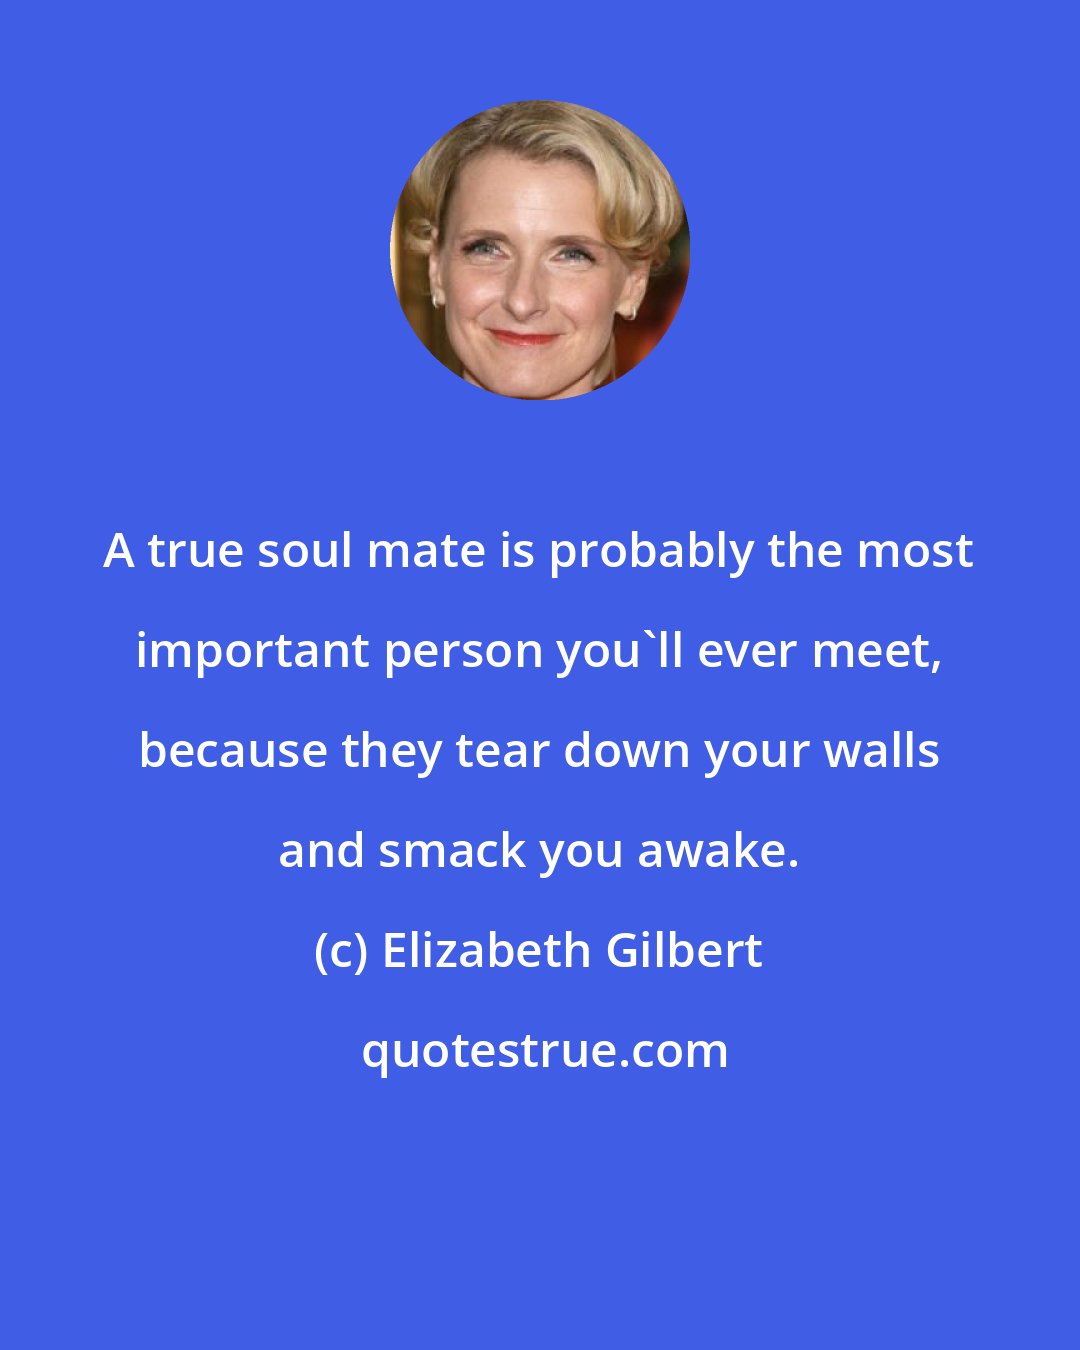 Elizabeth Gilbert: A true soul mate is probably the most important person you'll ever meet, because they tear down your walls and smack you awake.